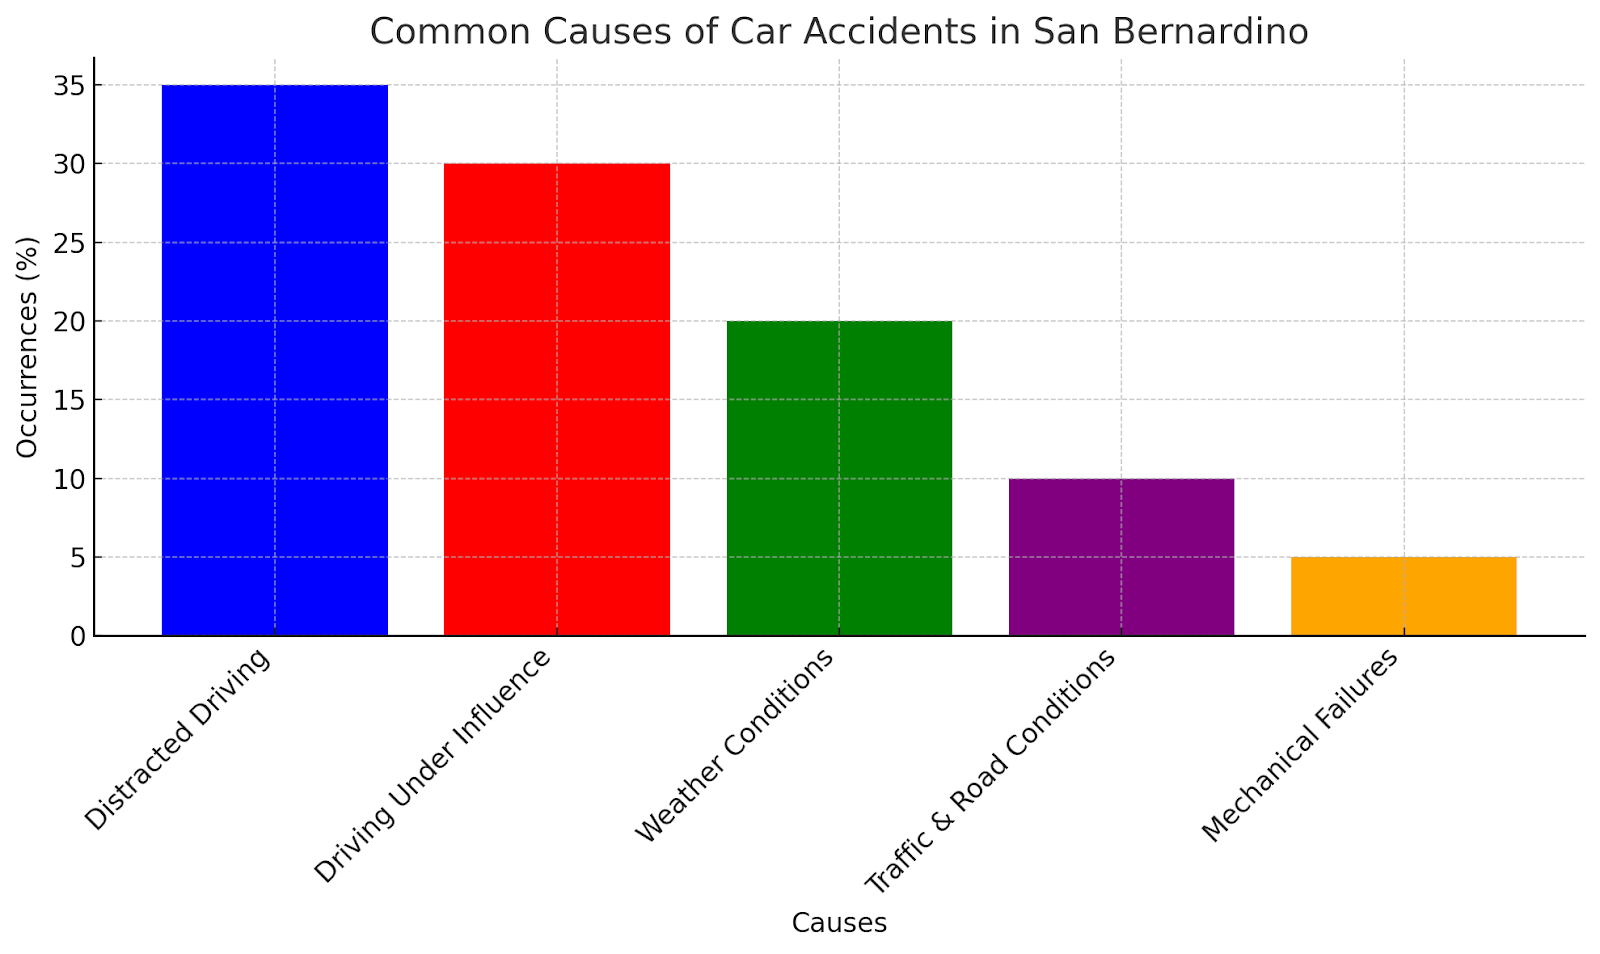 Common Causes of Car Accidents in San Bernardino